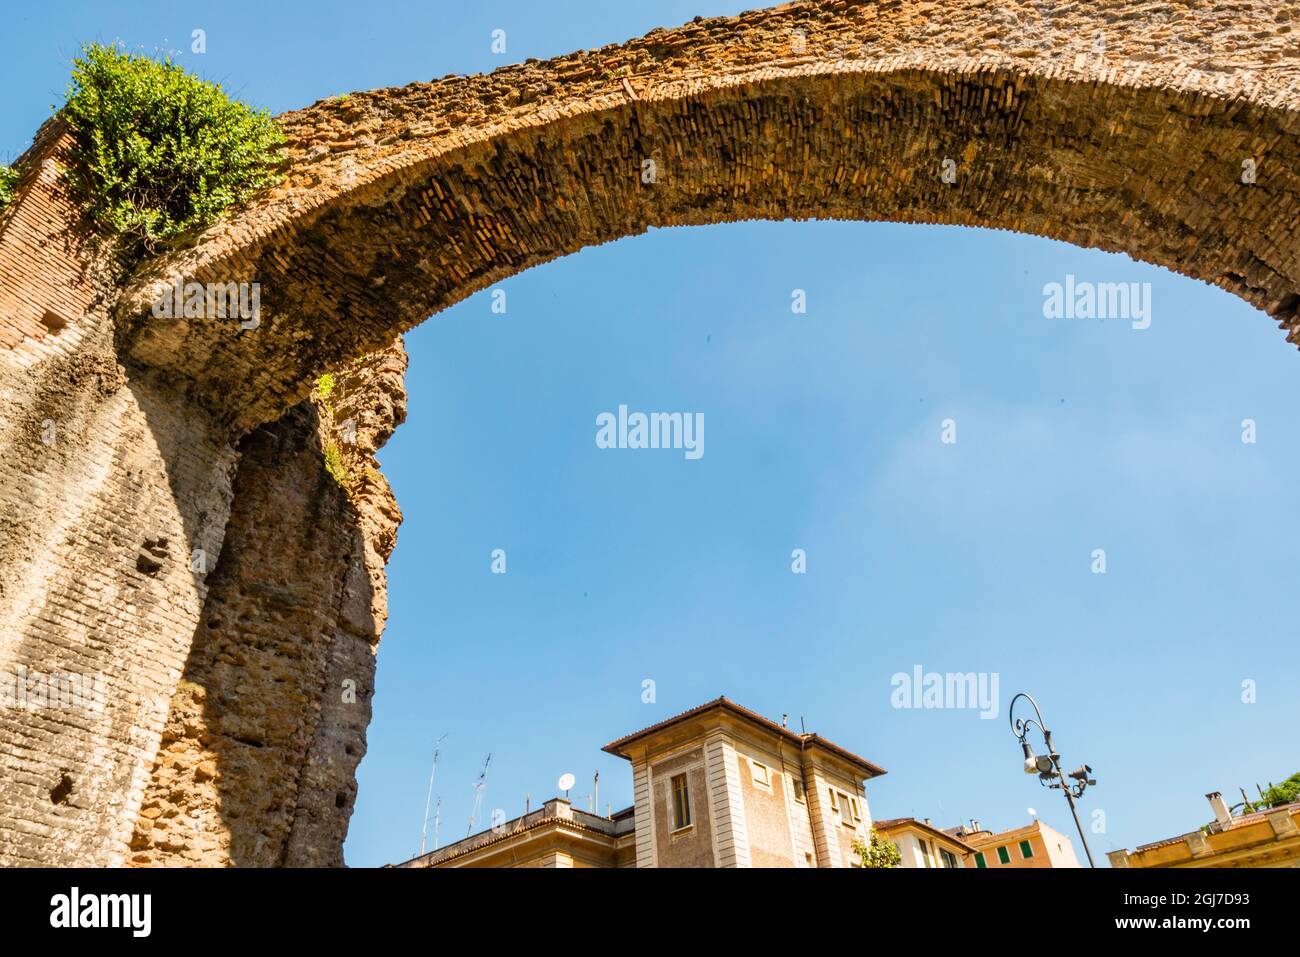 Italy, Rome. Arches of Nero's Branch (Arcus Neroniani), carrying water off Aqua Claudia aqueduct. Stock Photo